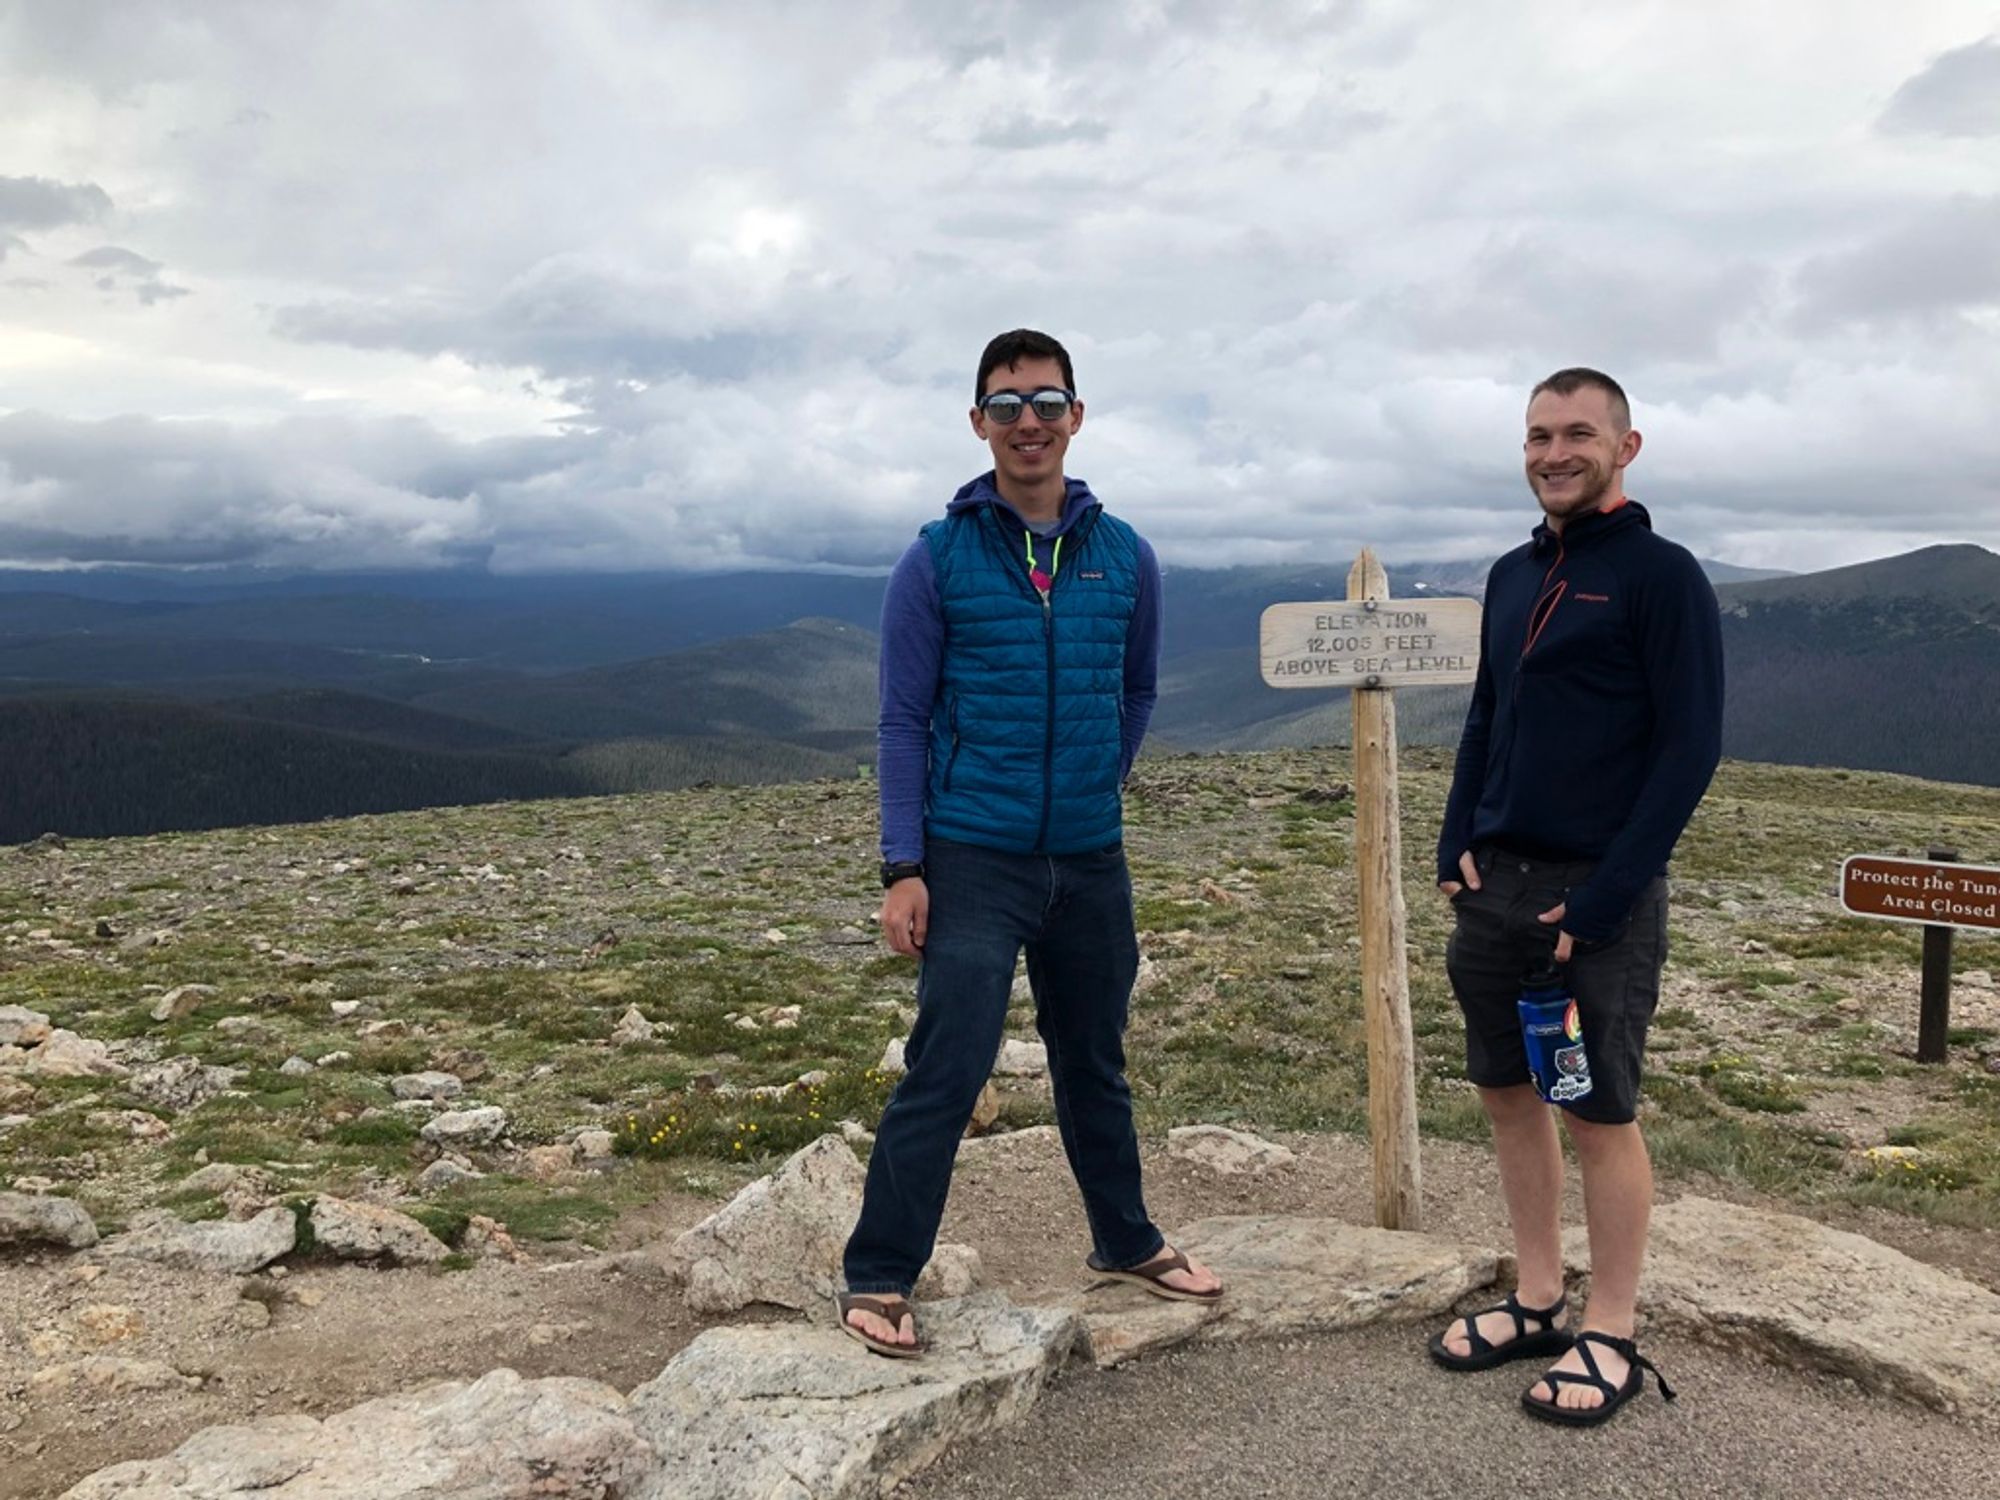 Me and Josh, standing in front of a small sign that says "Elevation 12,003 feet above sea level" with the Rocky Mountains in the background